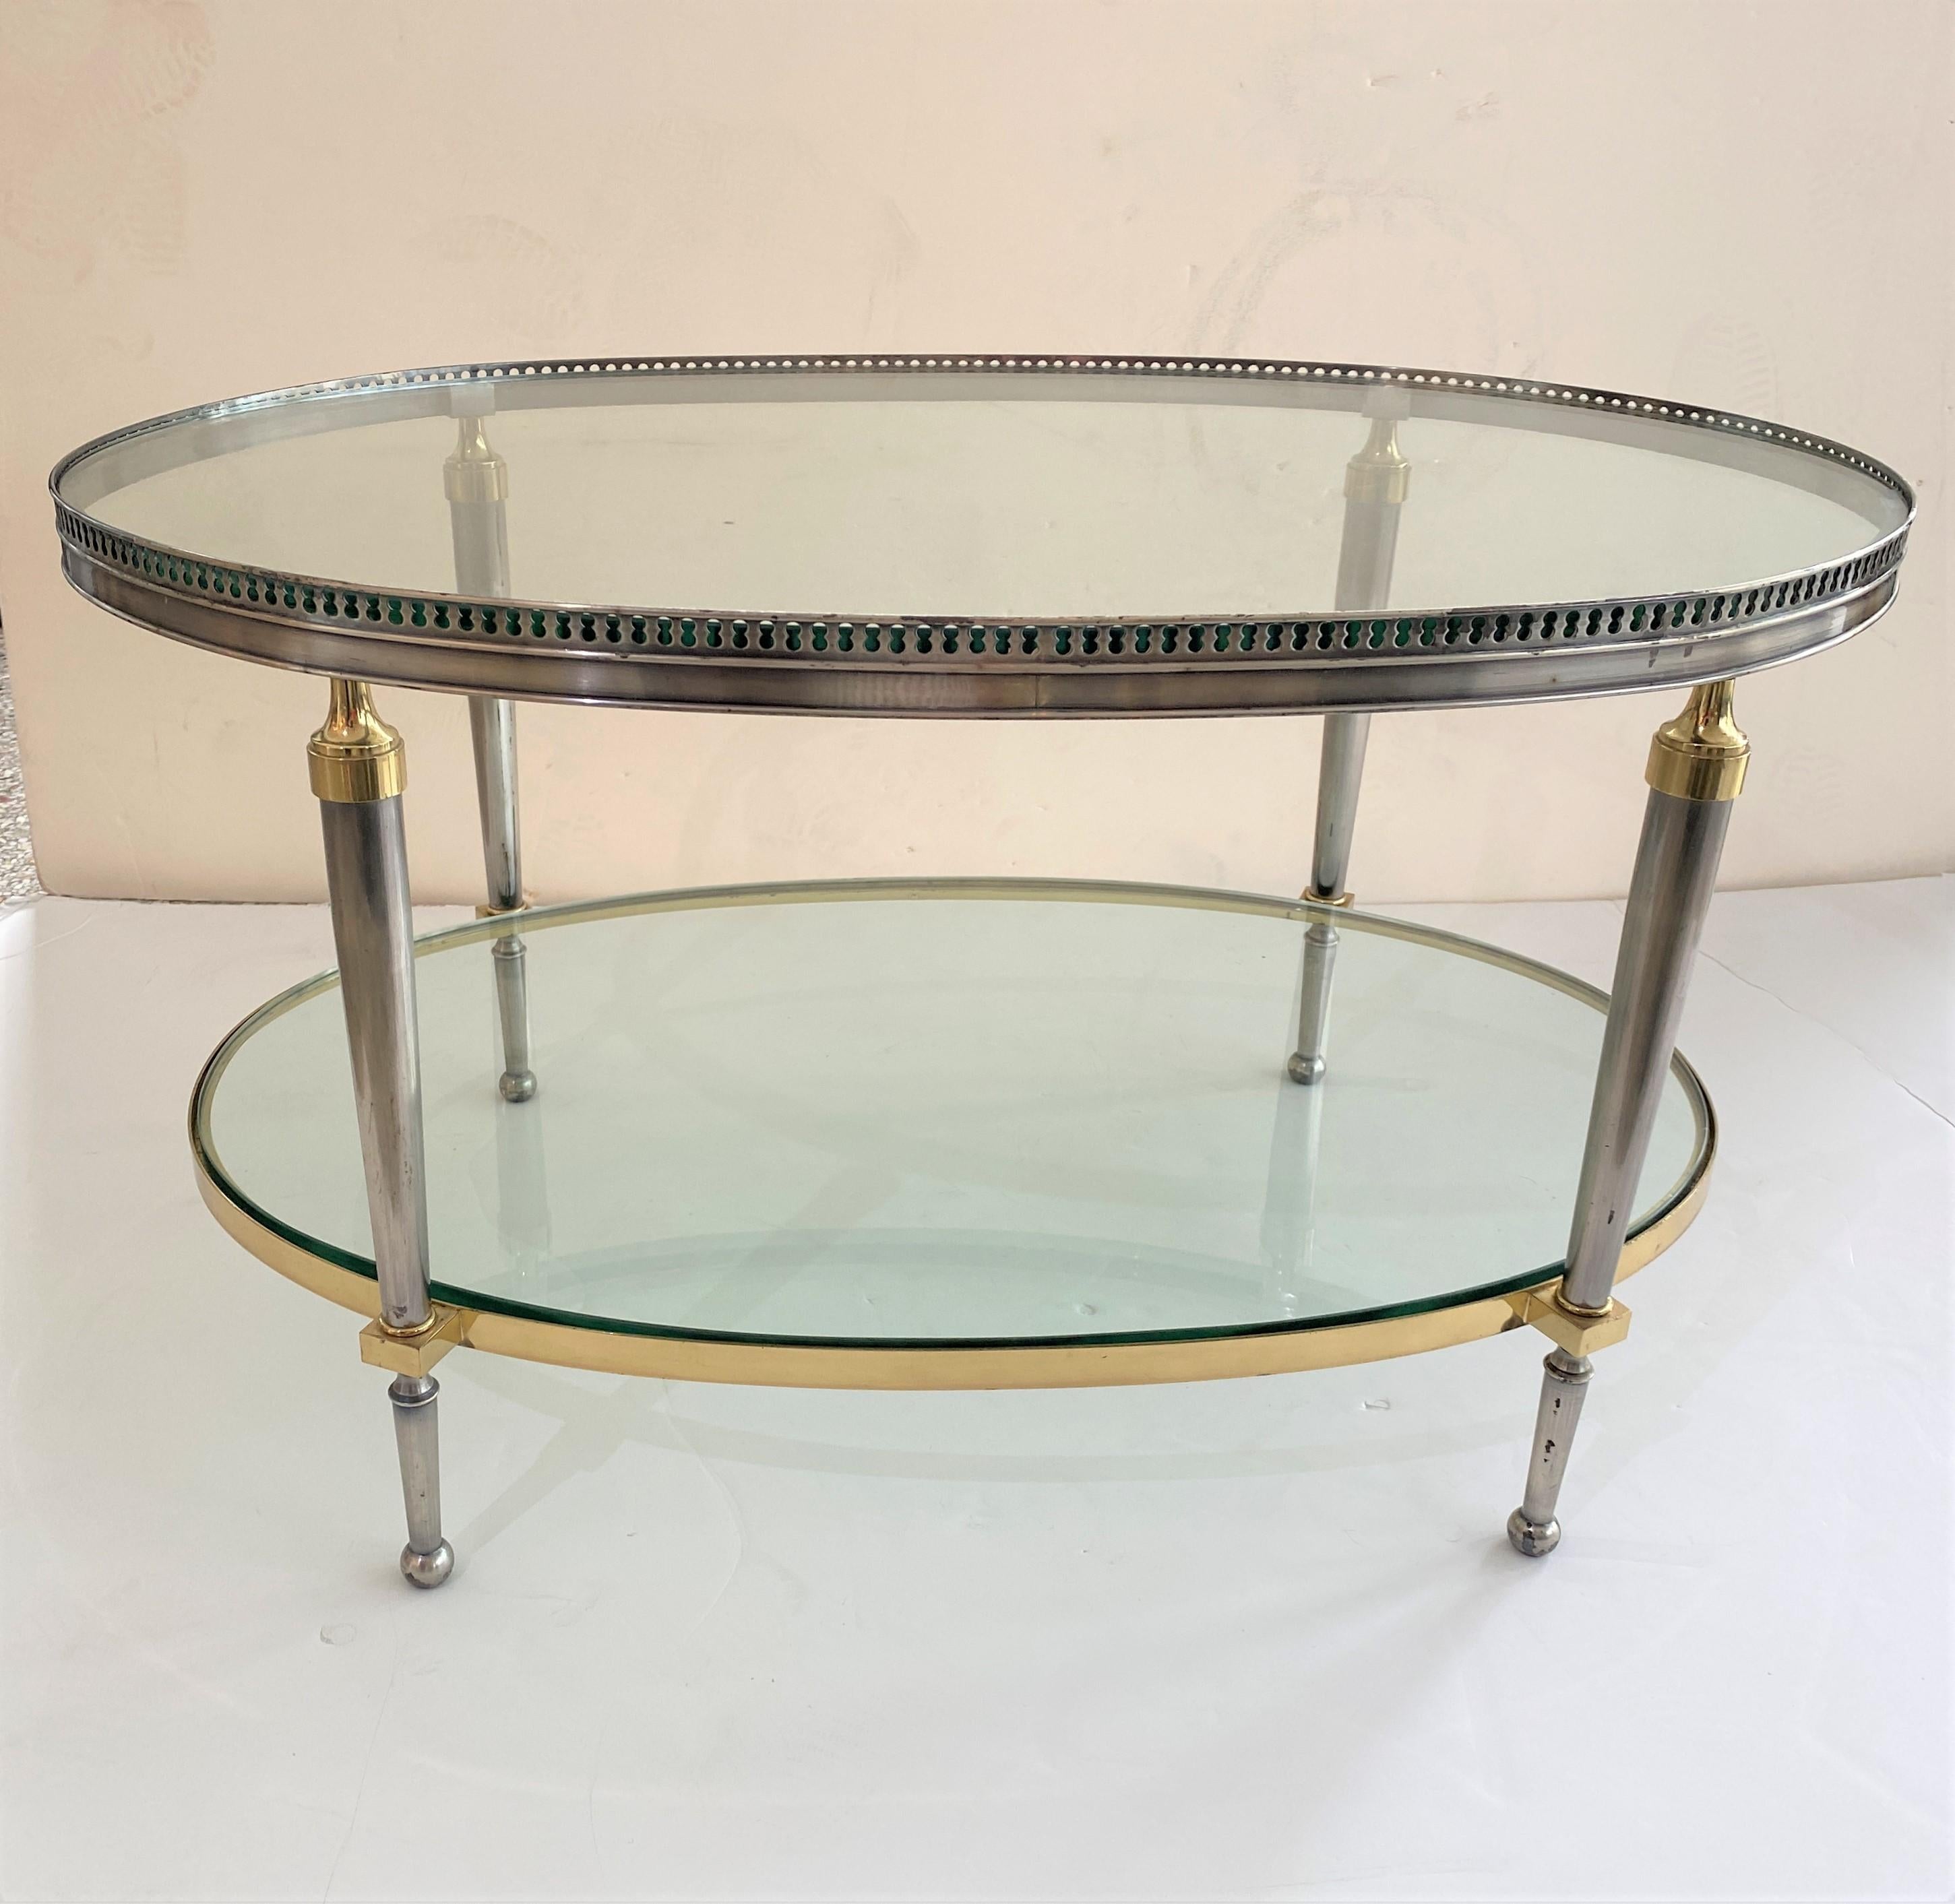 This stylish campaign style, oval-form, two-tiered cocktail table dates to the 1970s and was designed and fabricated by the American firm of Trouvailles of New York City. The piece is fabricated in steel, brass and glass.

Note: We have this table